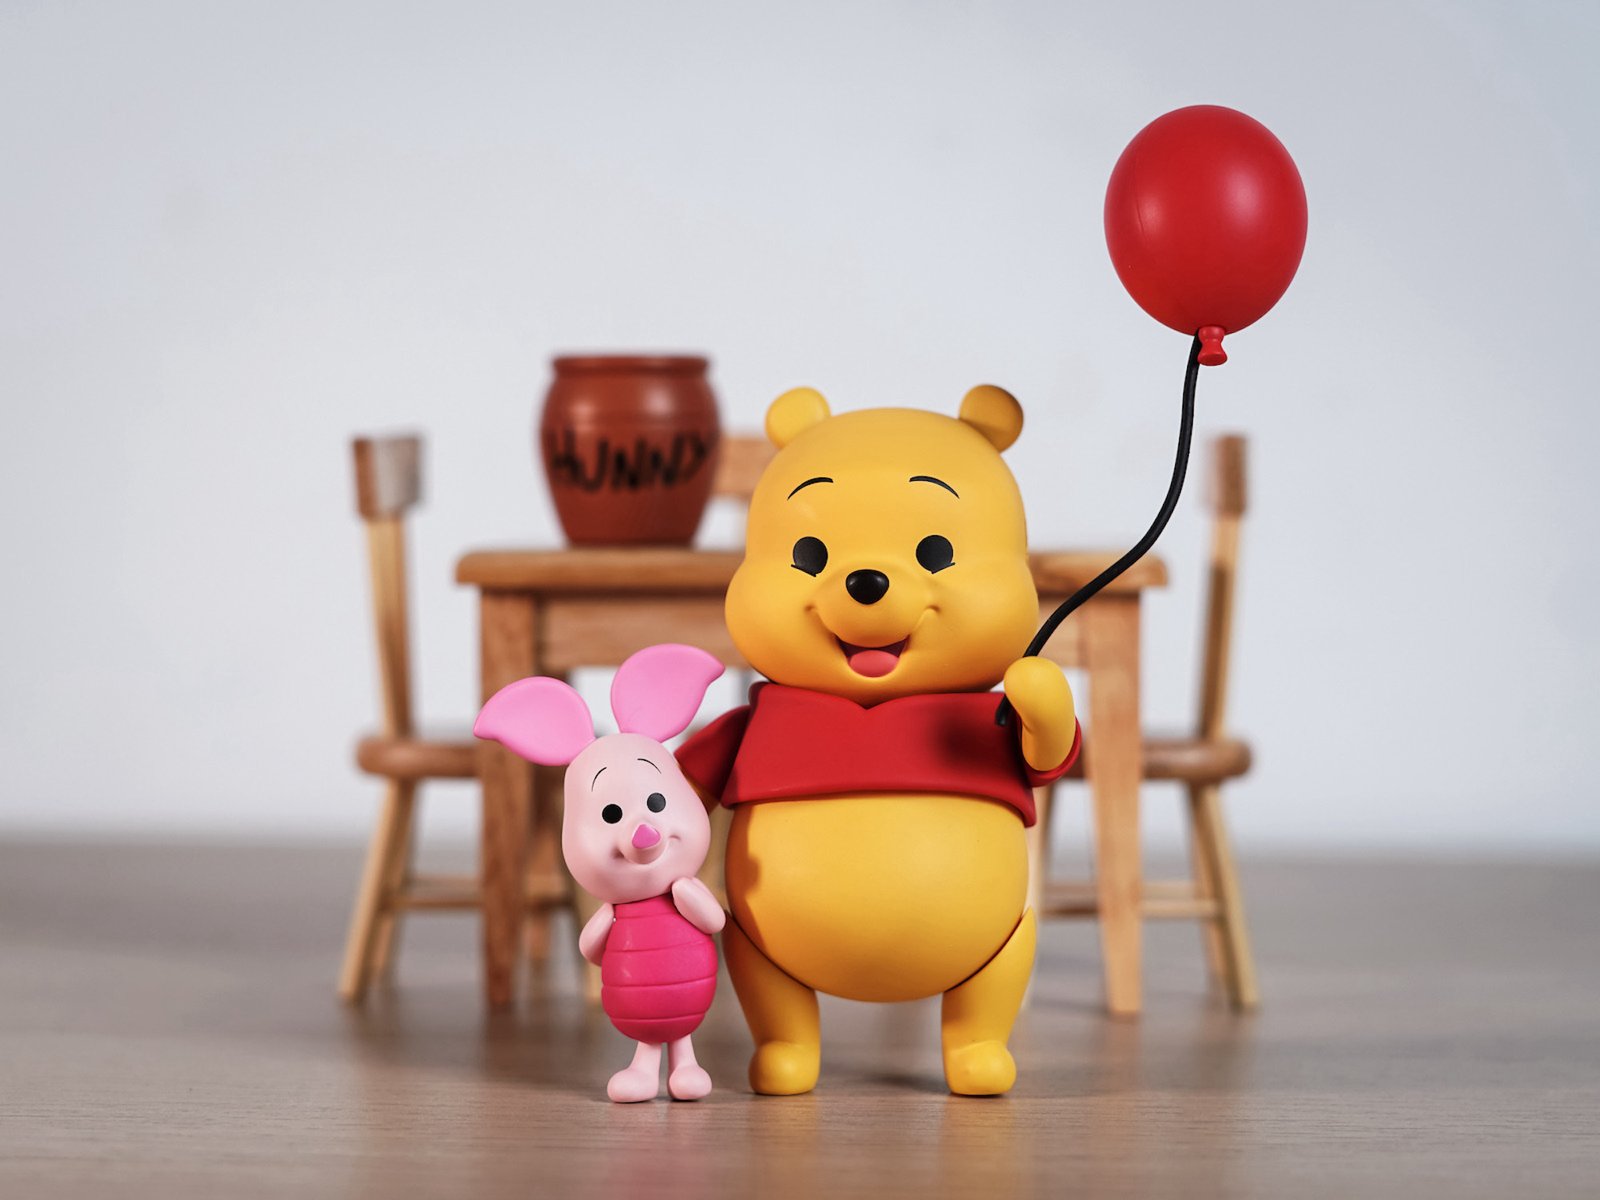 New York, USA - March 30, 2020: Winnie the Pooh and Piglet come out to greet everyone.